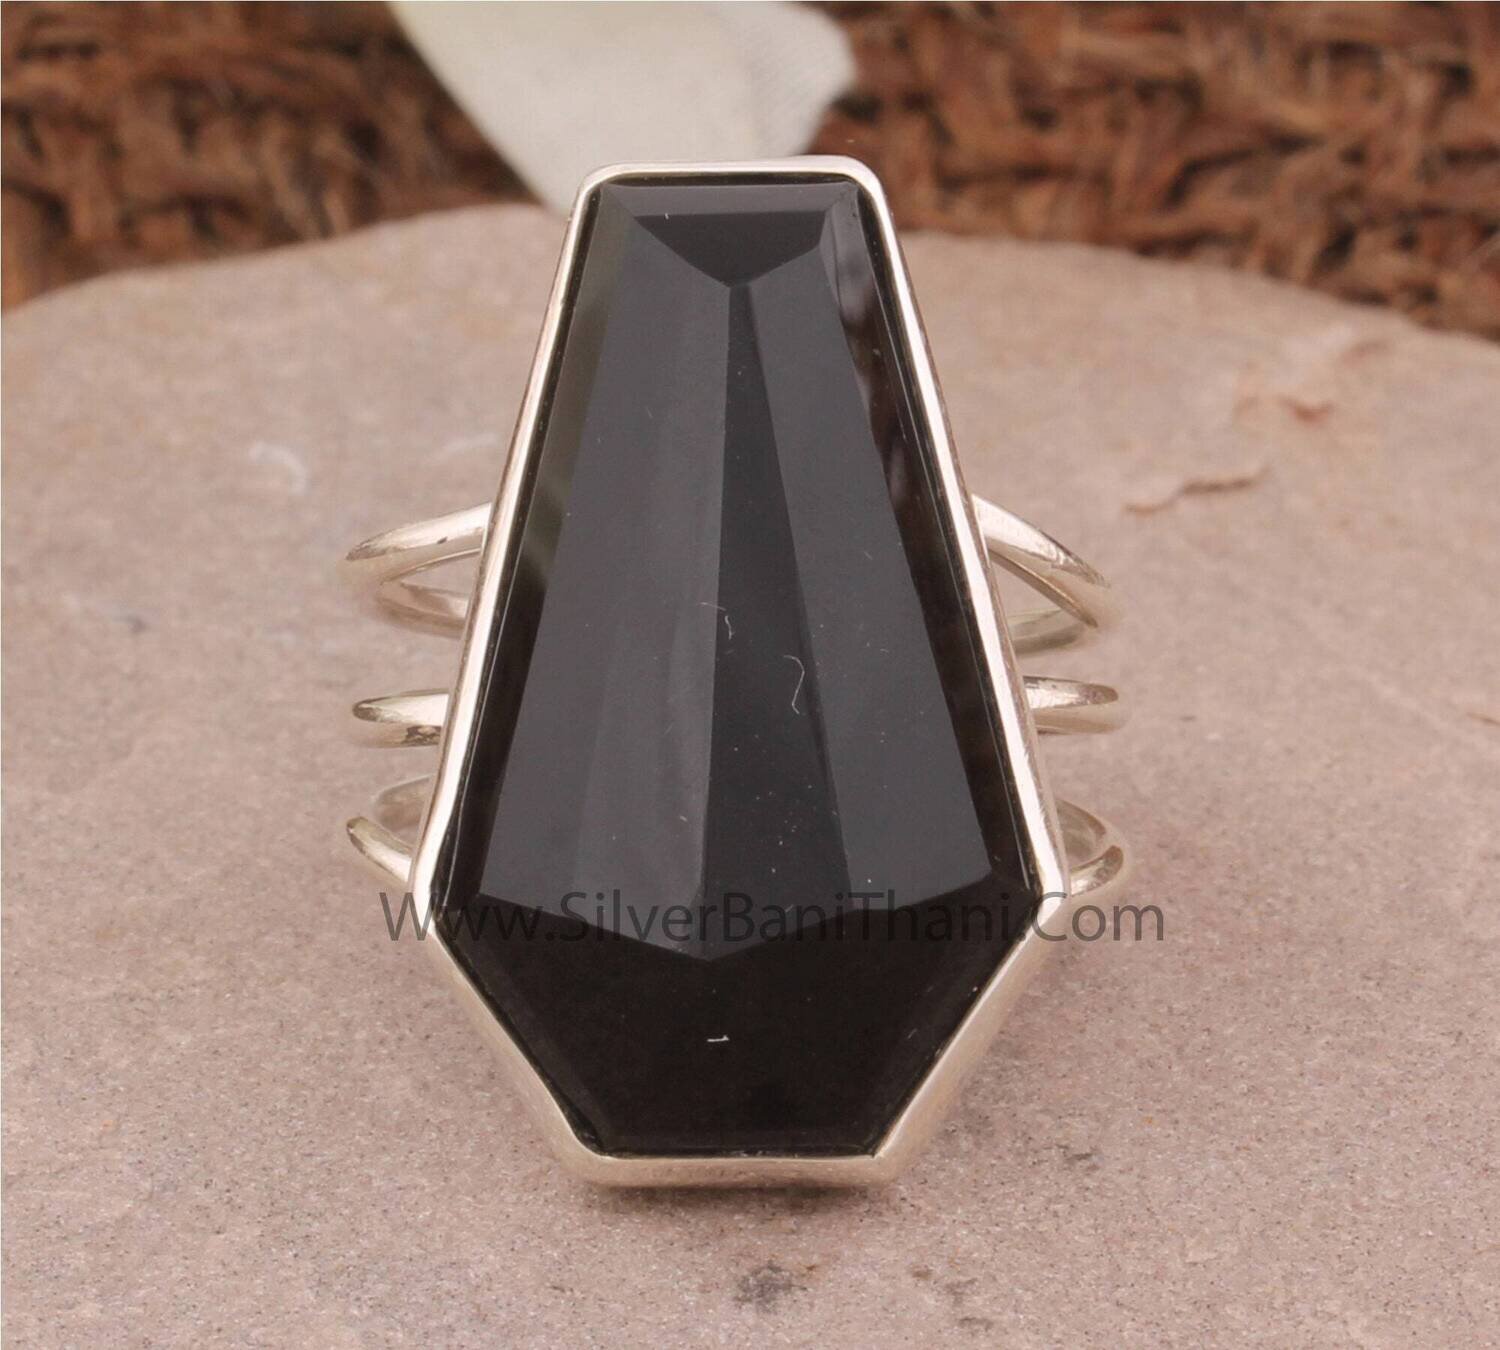 Black Onyx Silver Ring | 925 Sterling Solid Silver Ring | Coffin Shape Gemstone Ring | Everyday Jewelry | Christmas Gift | Gift For Women